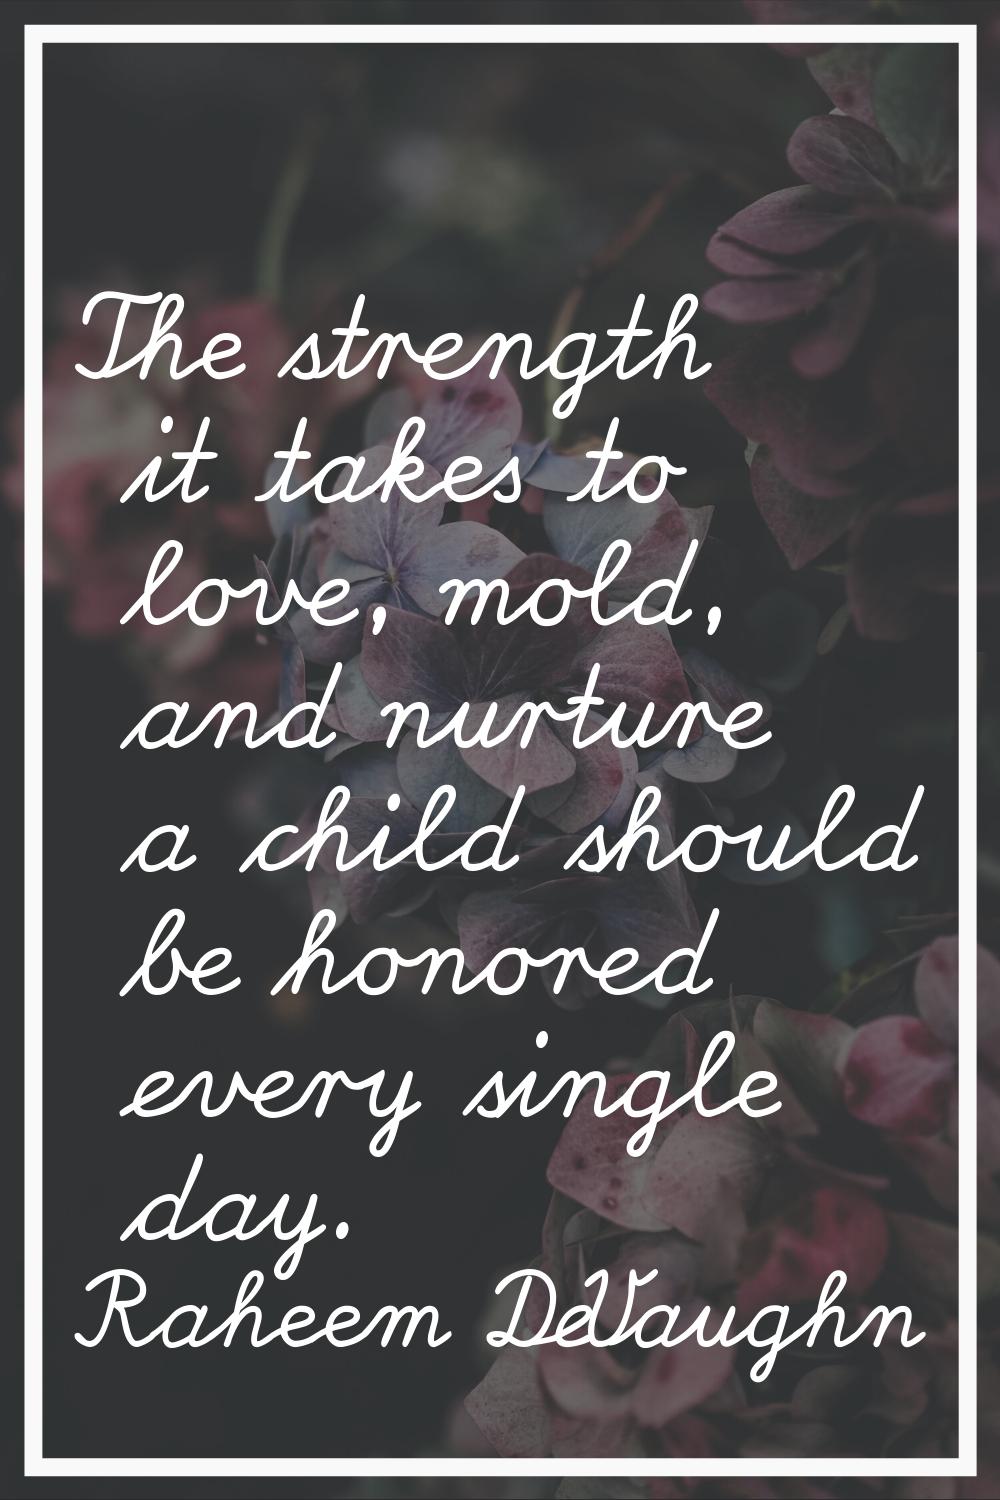 The strength it takes to love, mold, and nurture a child should be honored every single day.